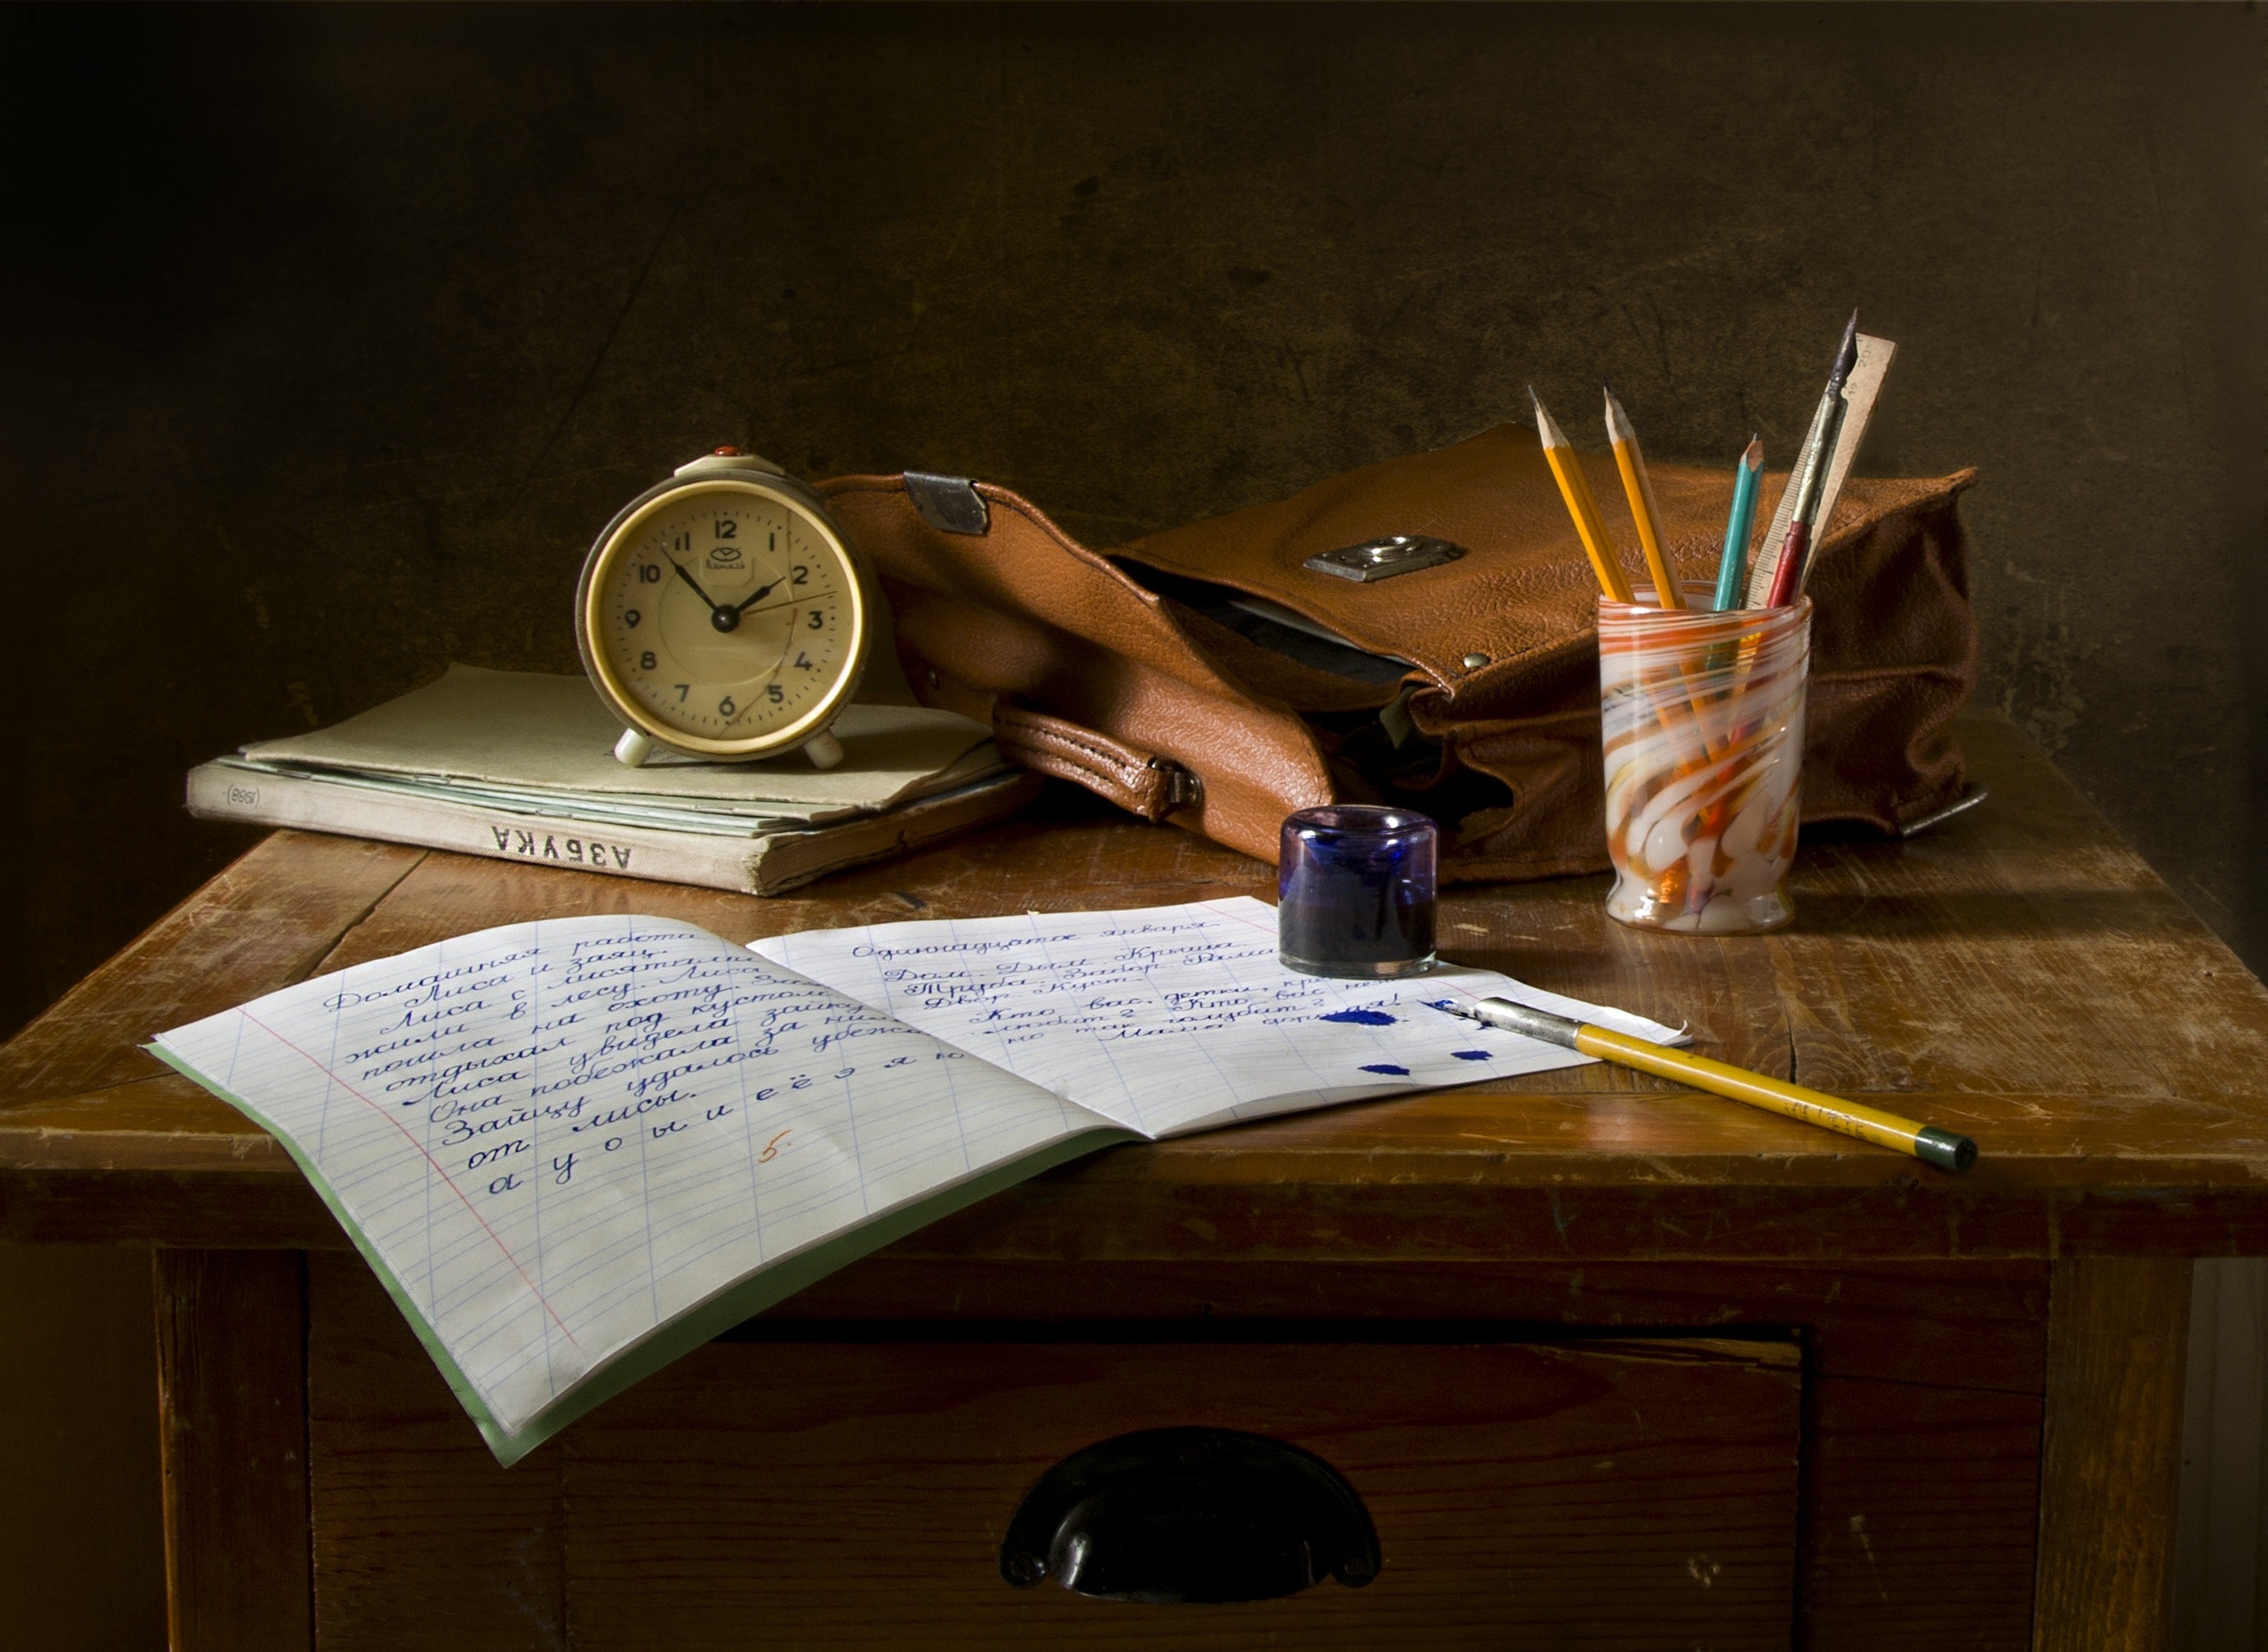 table with a n open notebook, pen pot with pens in a brown bag and a clock used for writing on the wall